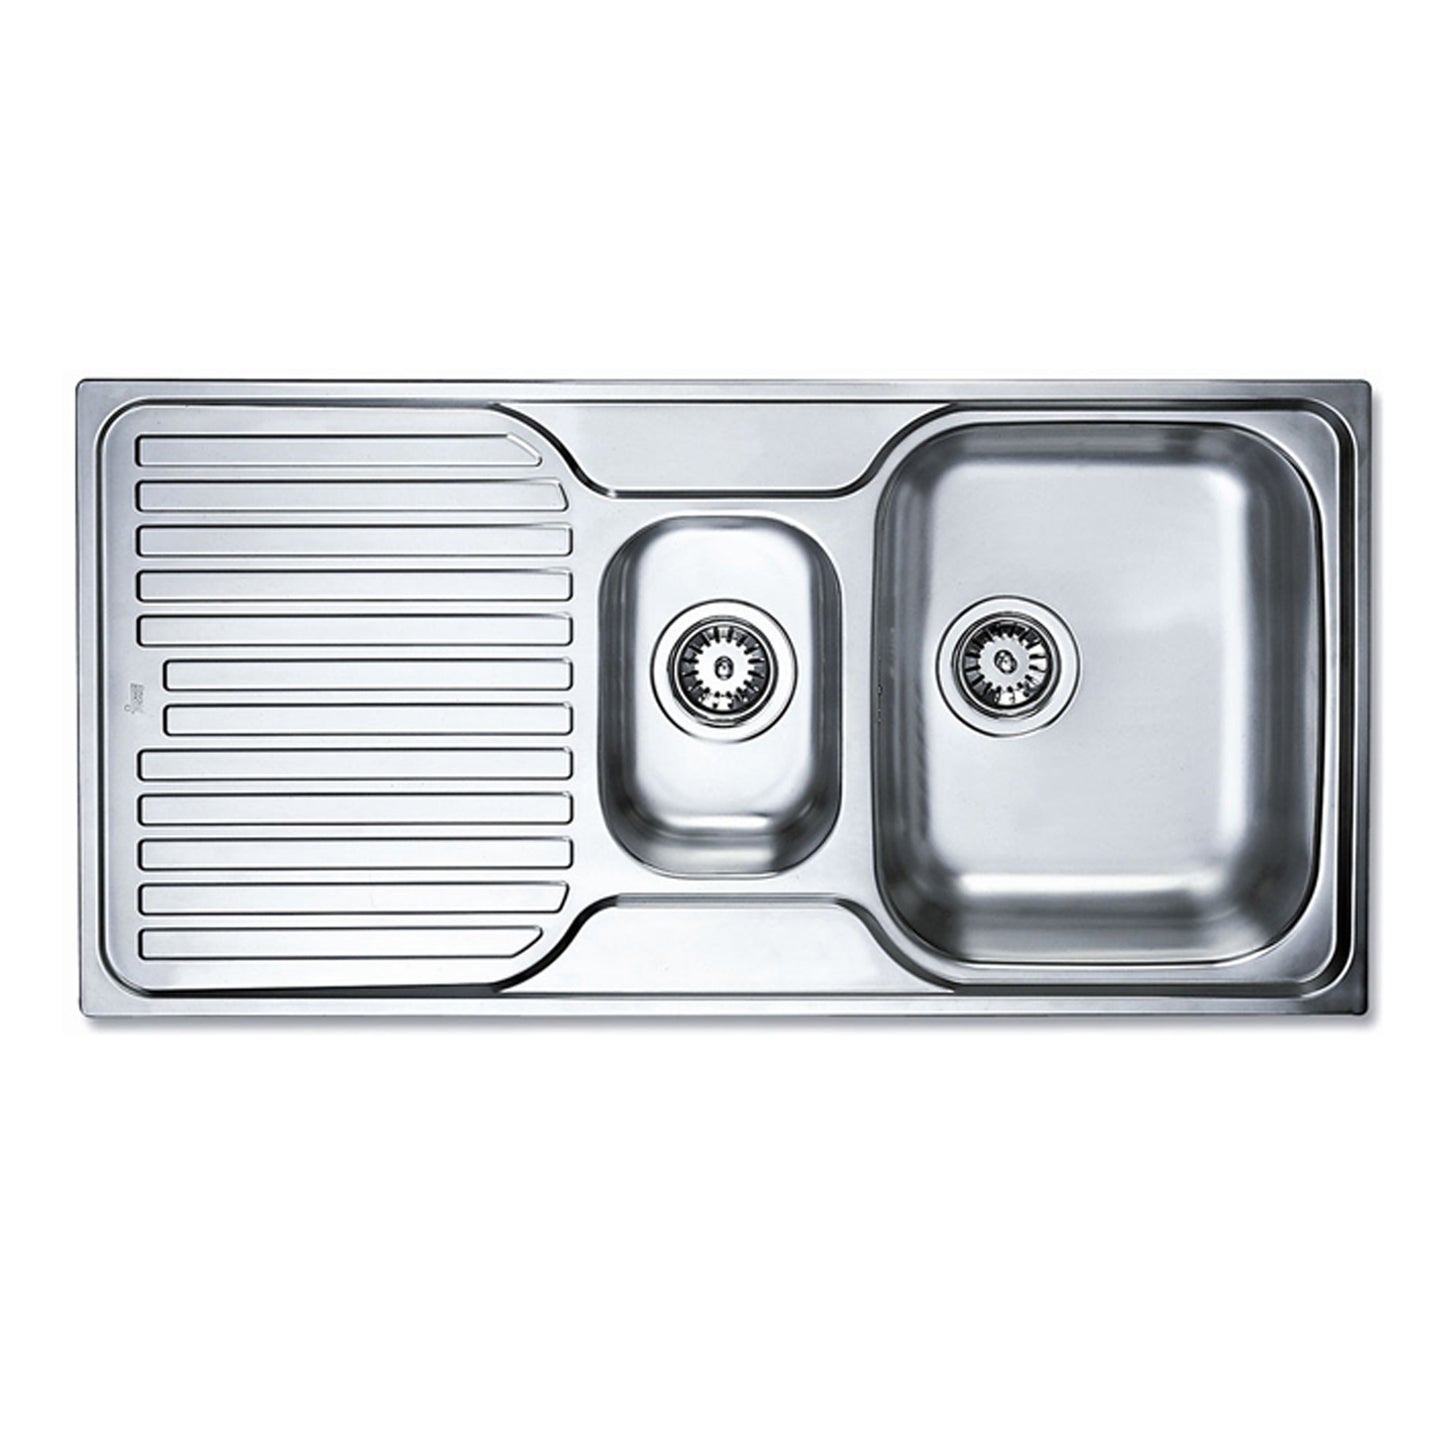 TEKA Noble Princess One and a Half Bowl w/ Left Drainboard Inset Sink 4012.7202.